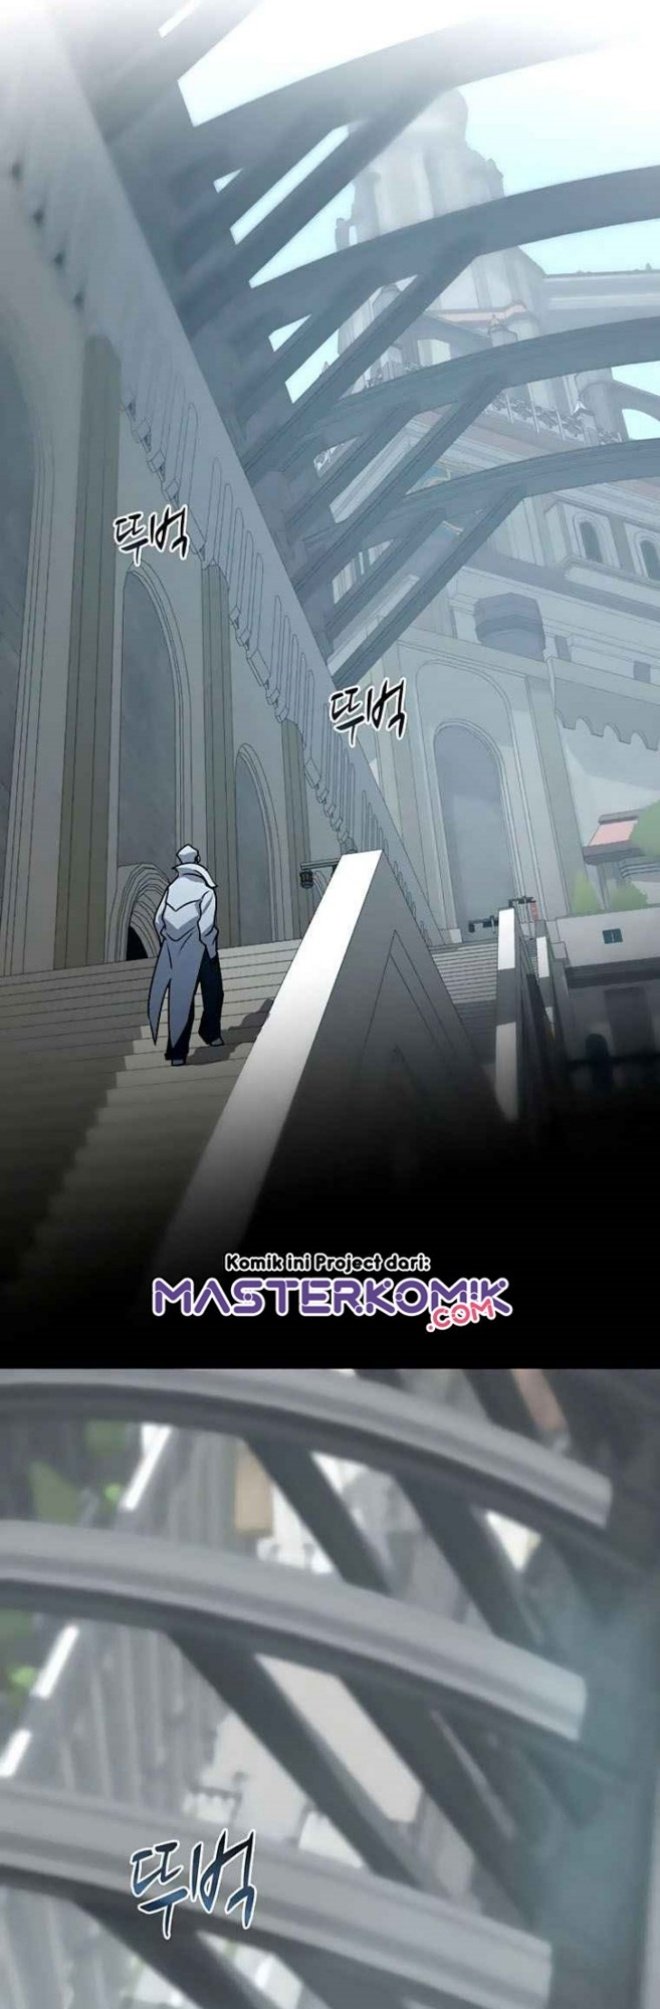 Book Eater Chapter 43